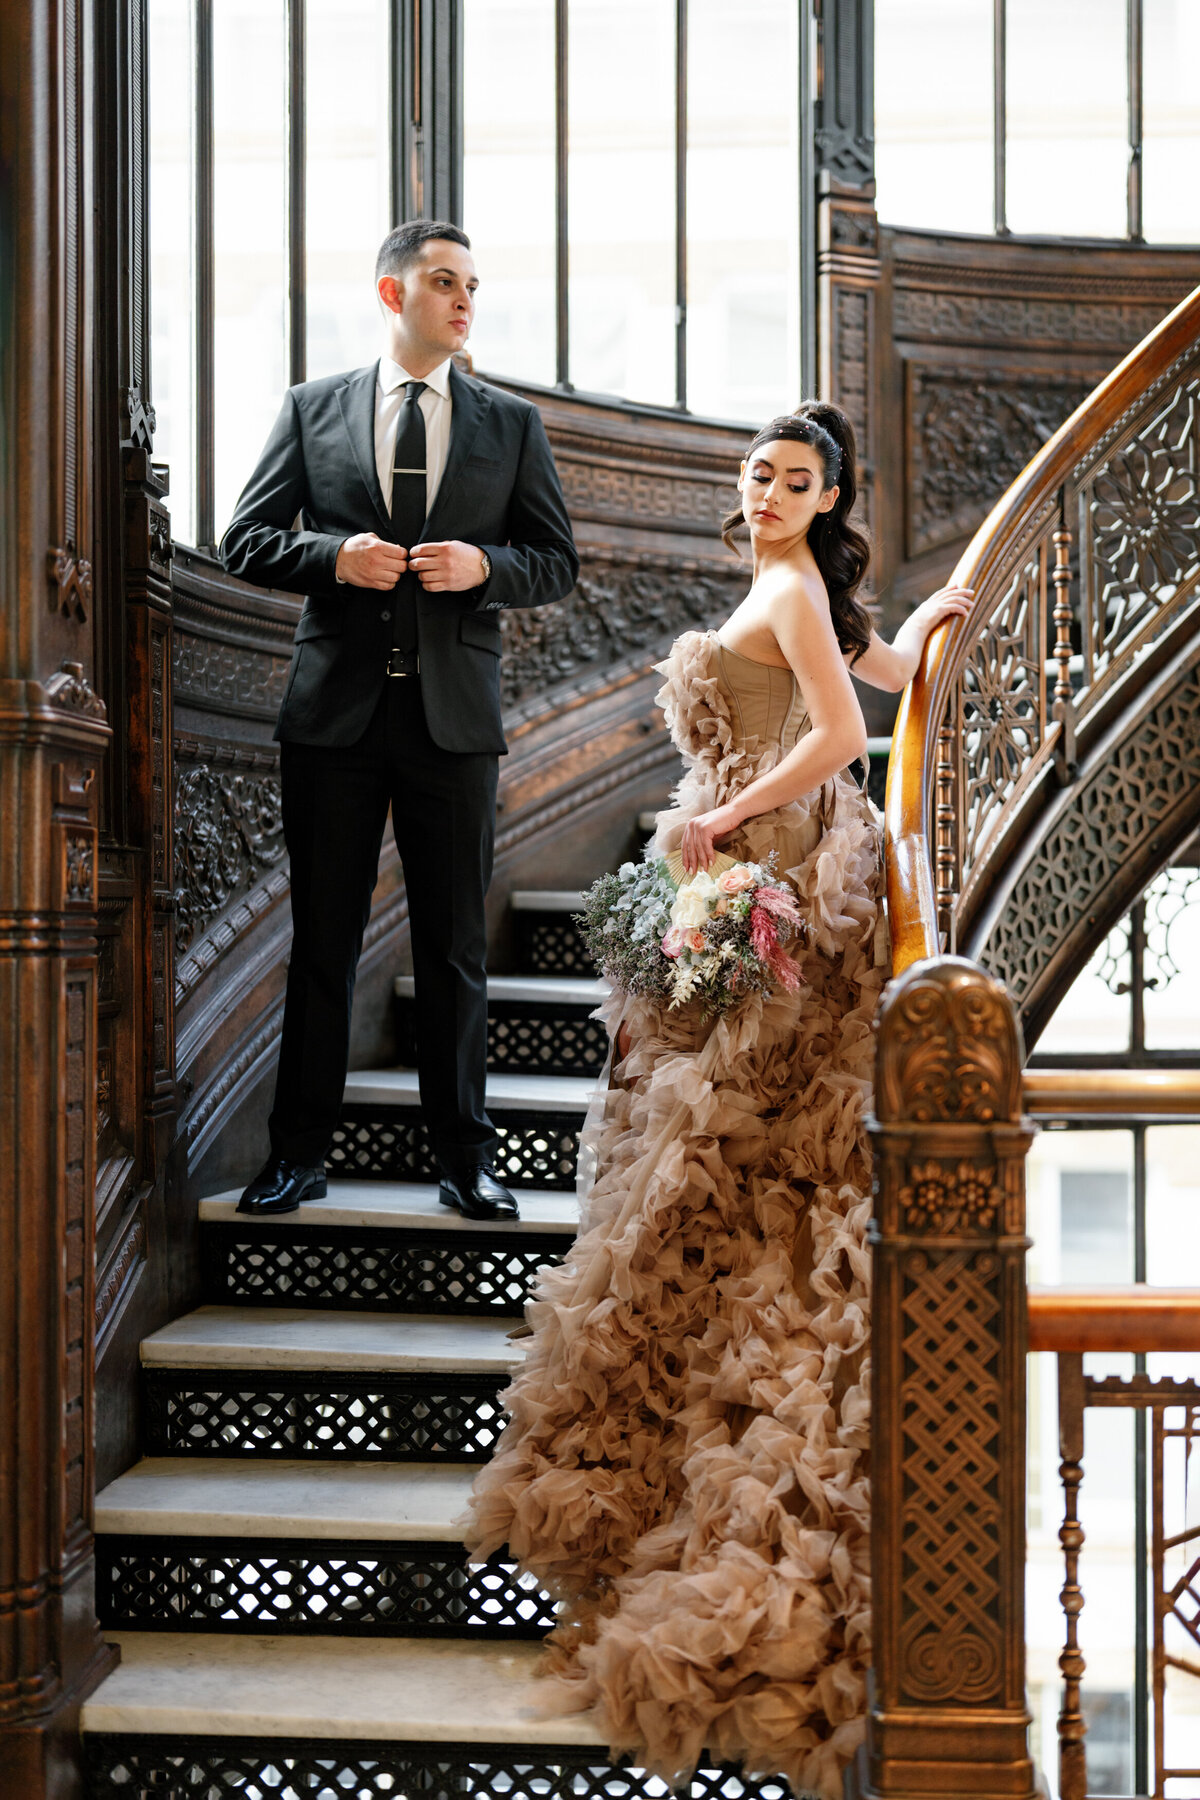 Aspen-Avenue-Chicago-Wedding-Photographer-Rookery-Engagement-Session-Histoircal-Stairs-Moody-Dramatic-Magazine-Unique-Gown-Stemming-From-Love-Emily-Rae-Bridal-Hair-FAV-9